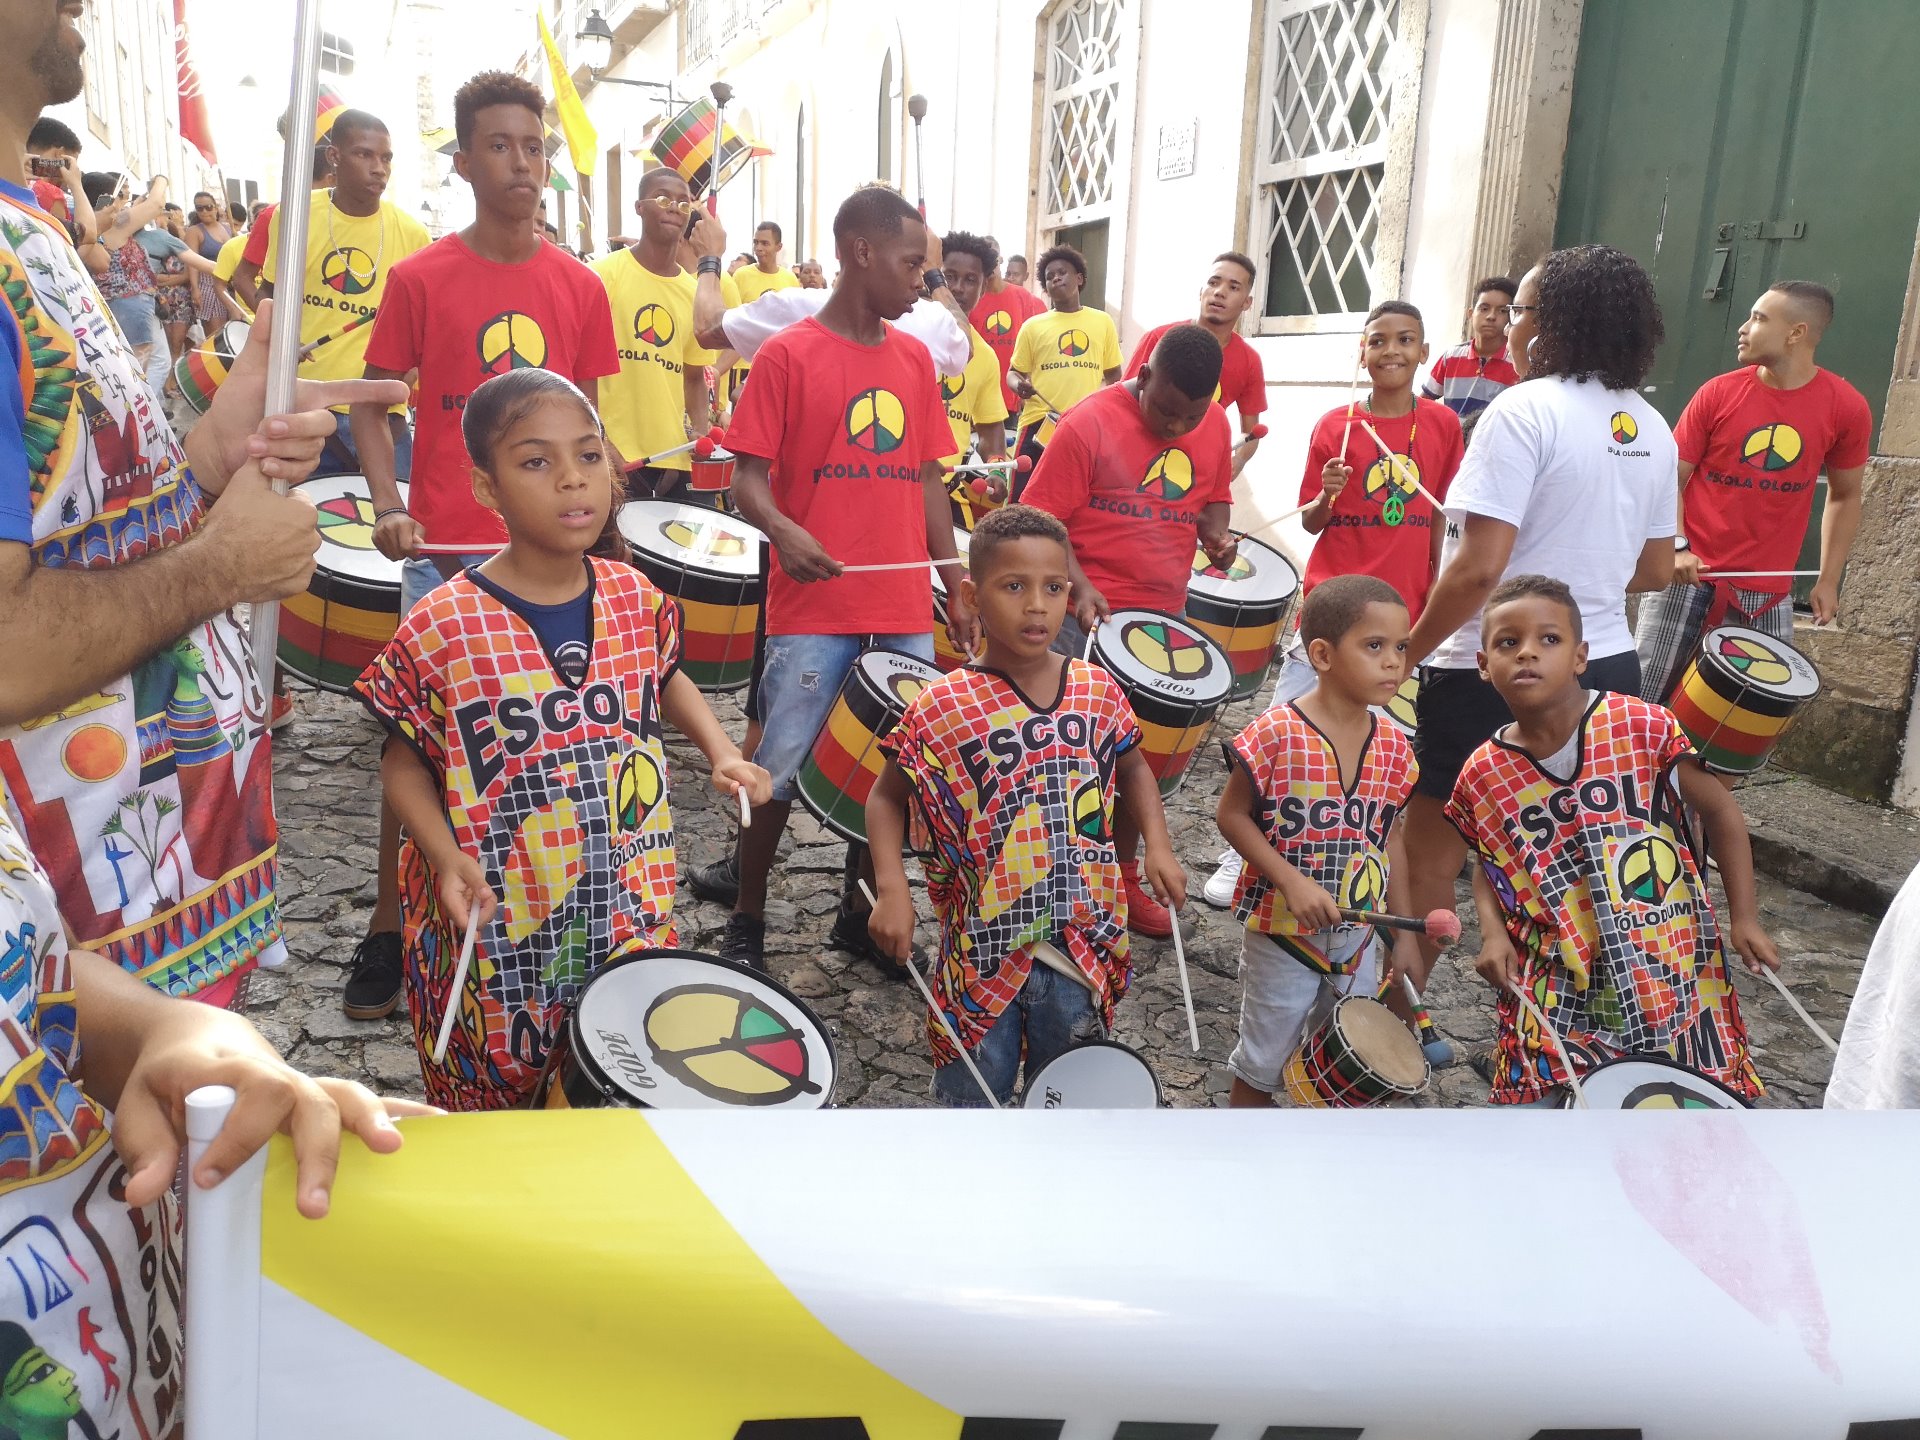 According to Lucas, Olodum is a model that can change circumstances for underprivileged communities in cities all over the world.